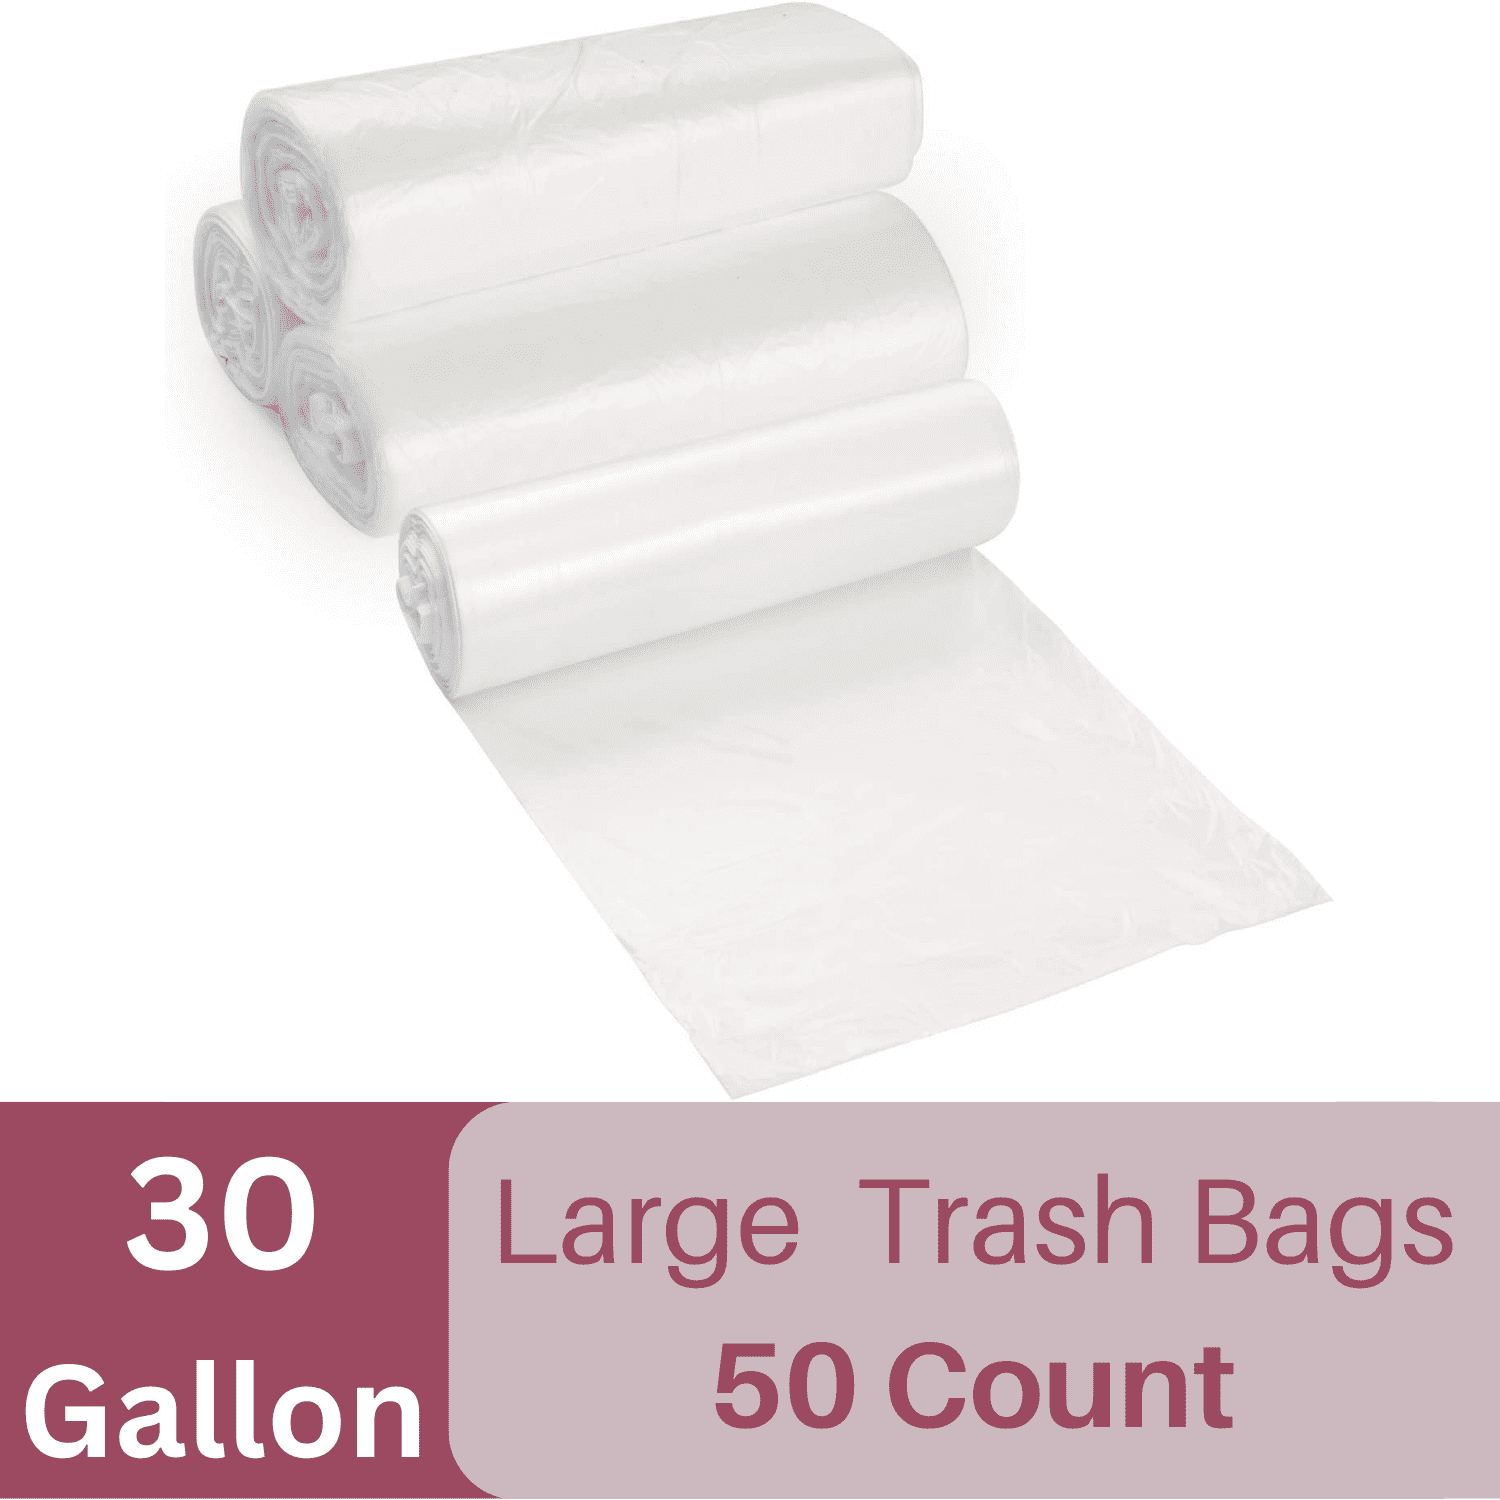 4 gallon trash can liners,250 counts,Small clear Garbage Bags,Extra Strong  4 5 Gal Trash Bag,Fit liters trash Bin Liners for Home Office